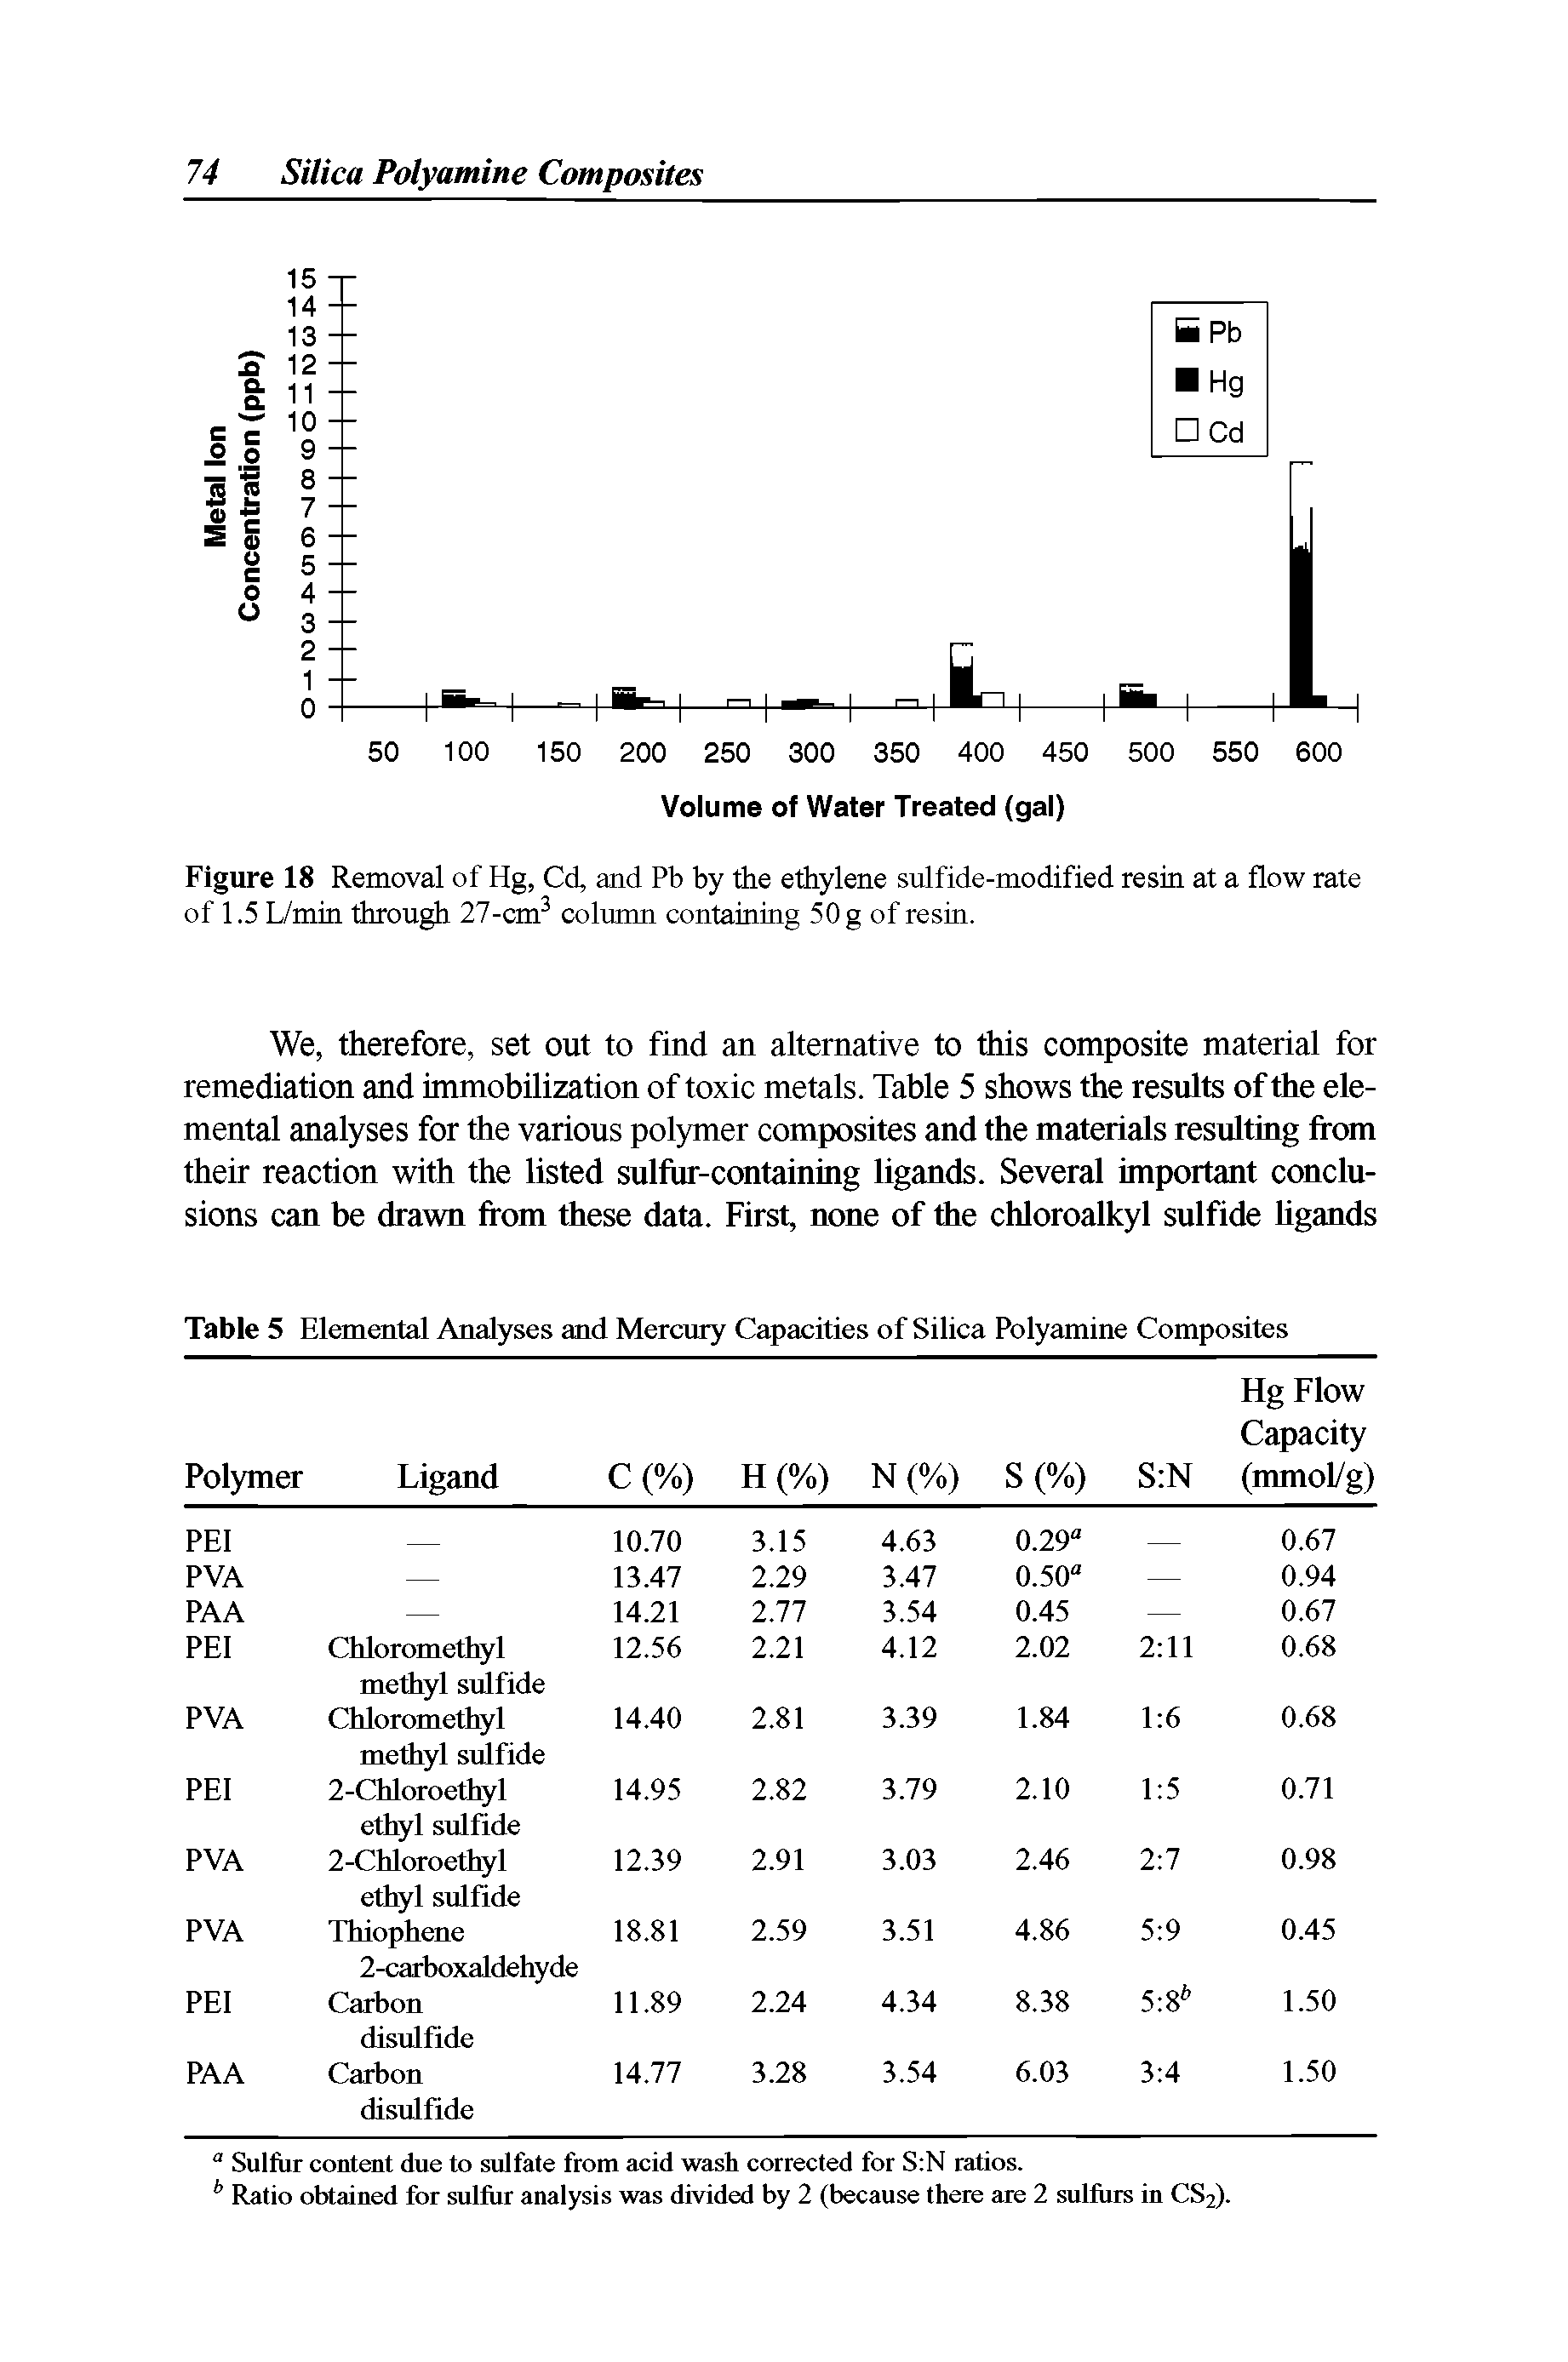 Figure 18 Removal of Hg, Cd, and Pb by the ethylene sulfide-modified resin at a flow rate of 1.5 L/min through 27-cm column containing 50 g of resin.